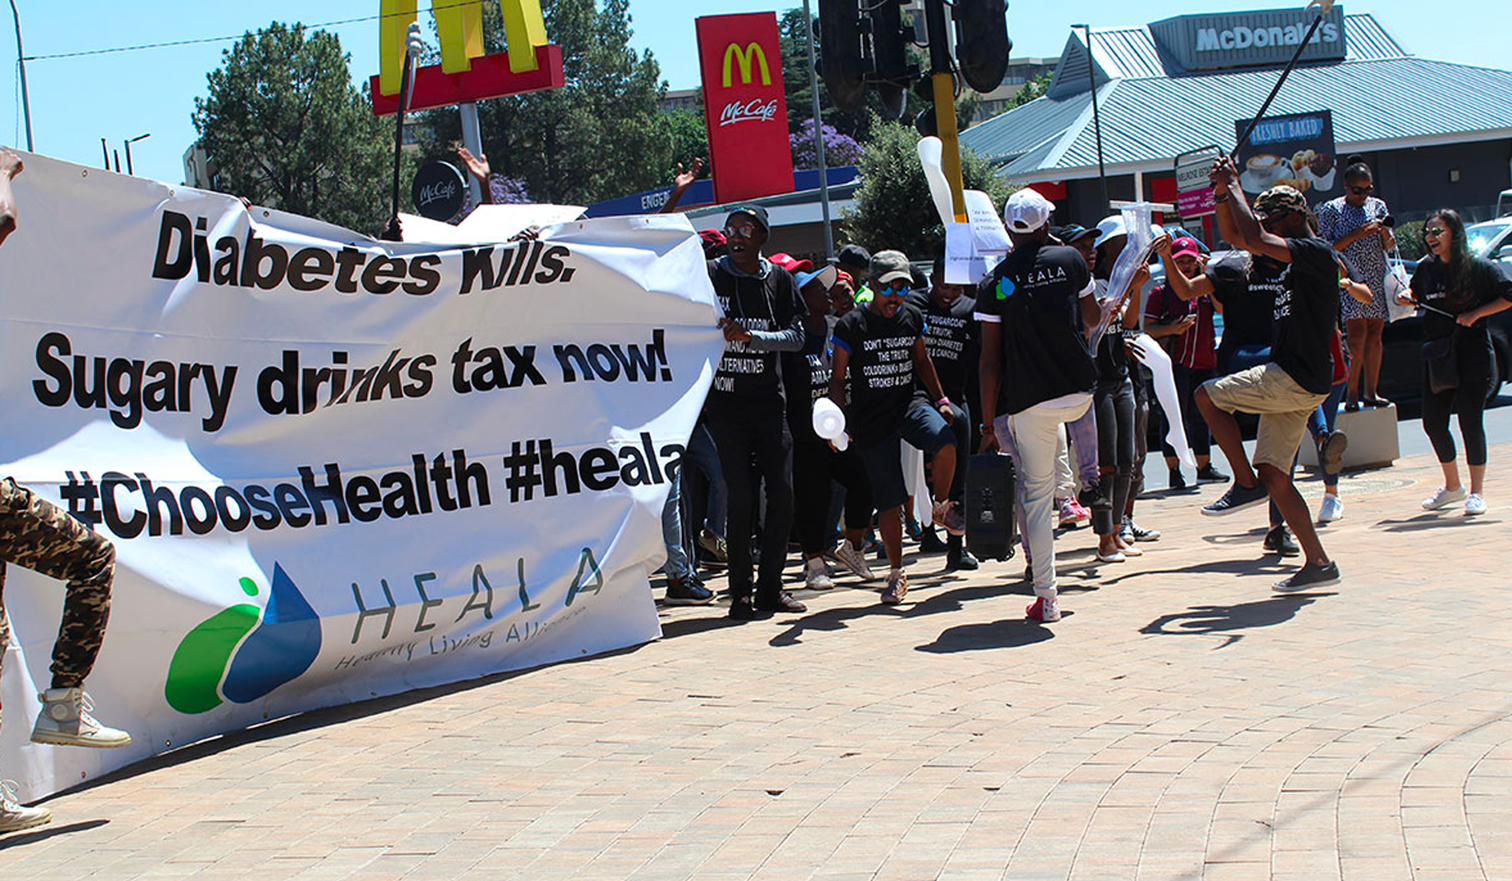 South African partners advocating for a stronger tax during the protests outside McDonalds in Johannesburg. Source: HEALA